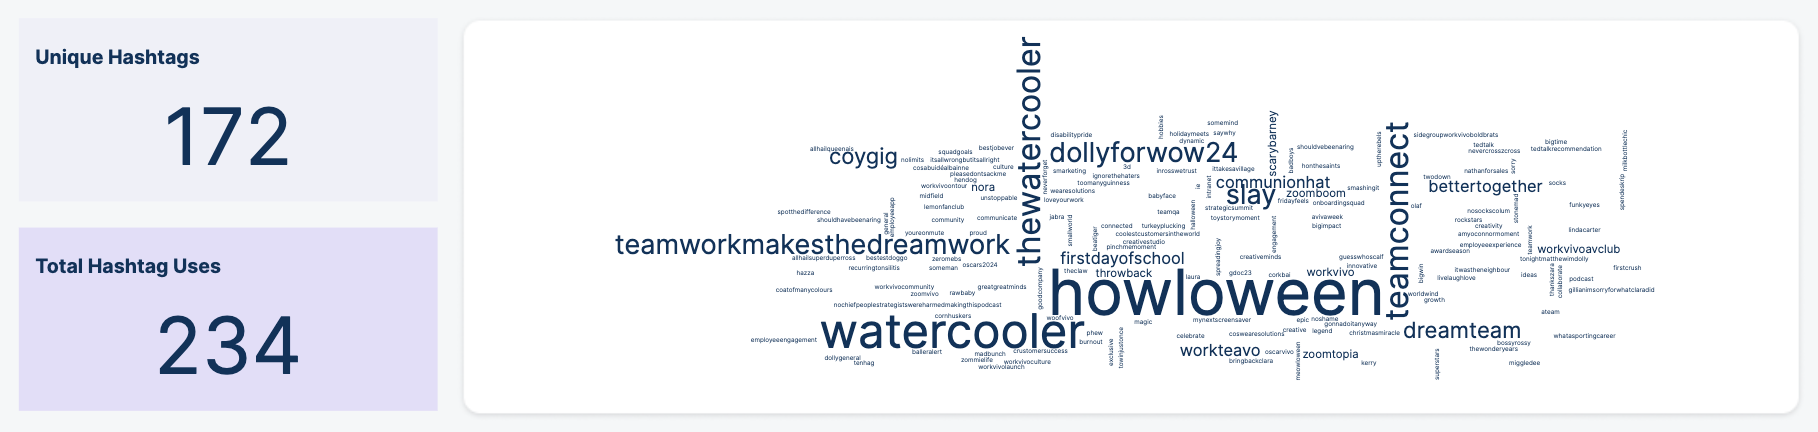 Hashtags Ratios and word cloud.png